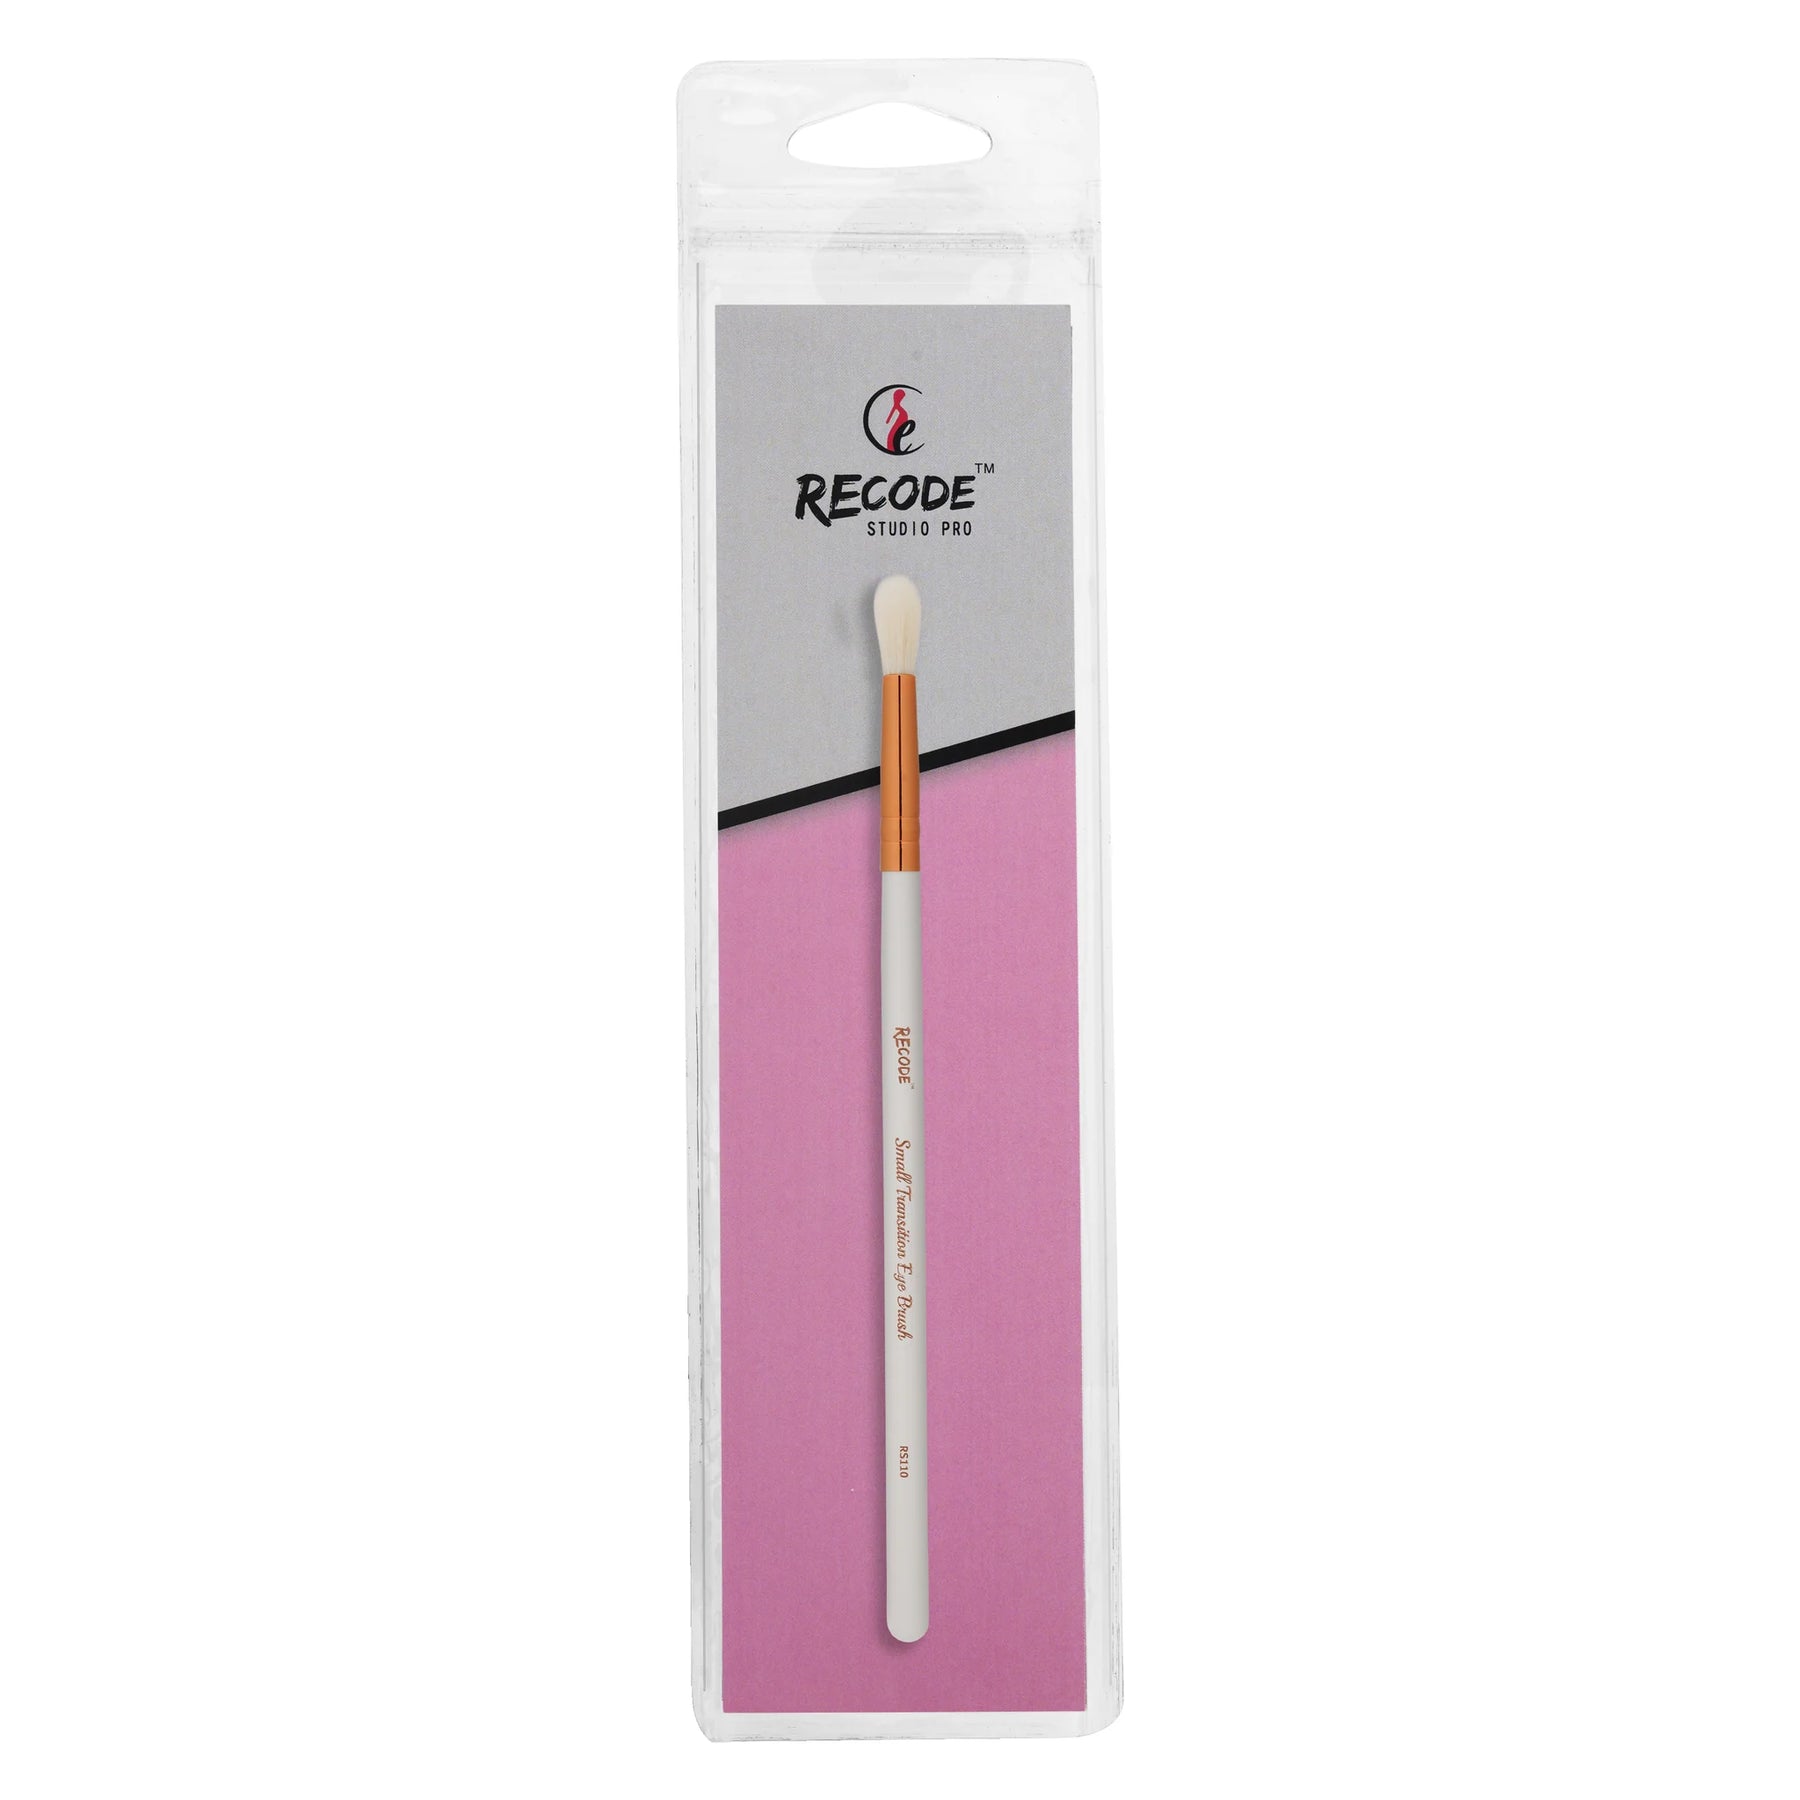 RECODE RS 110 SMALL TRANSITION EYE BRUSH